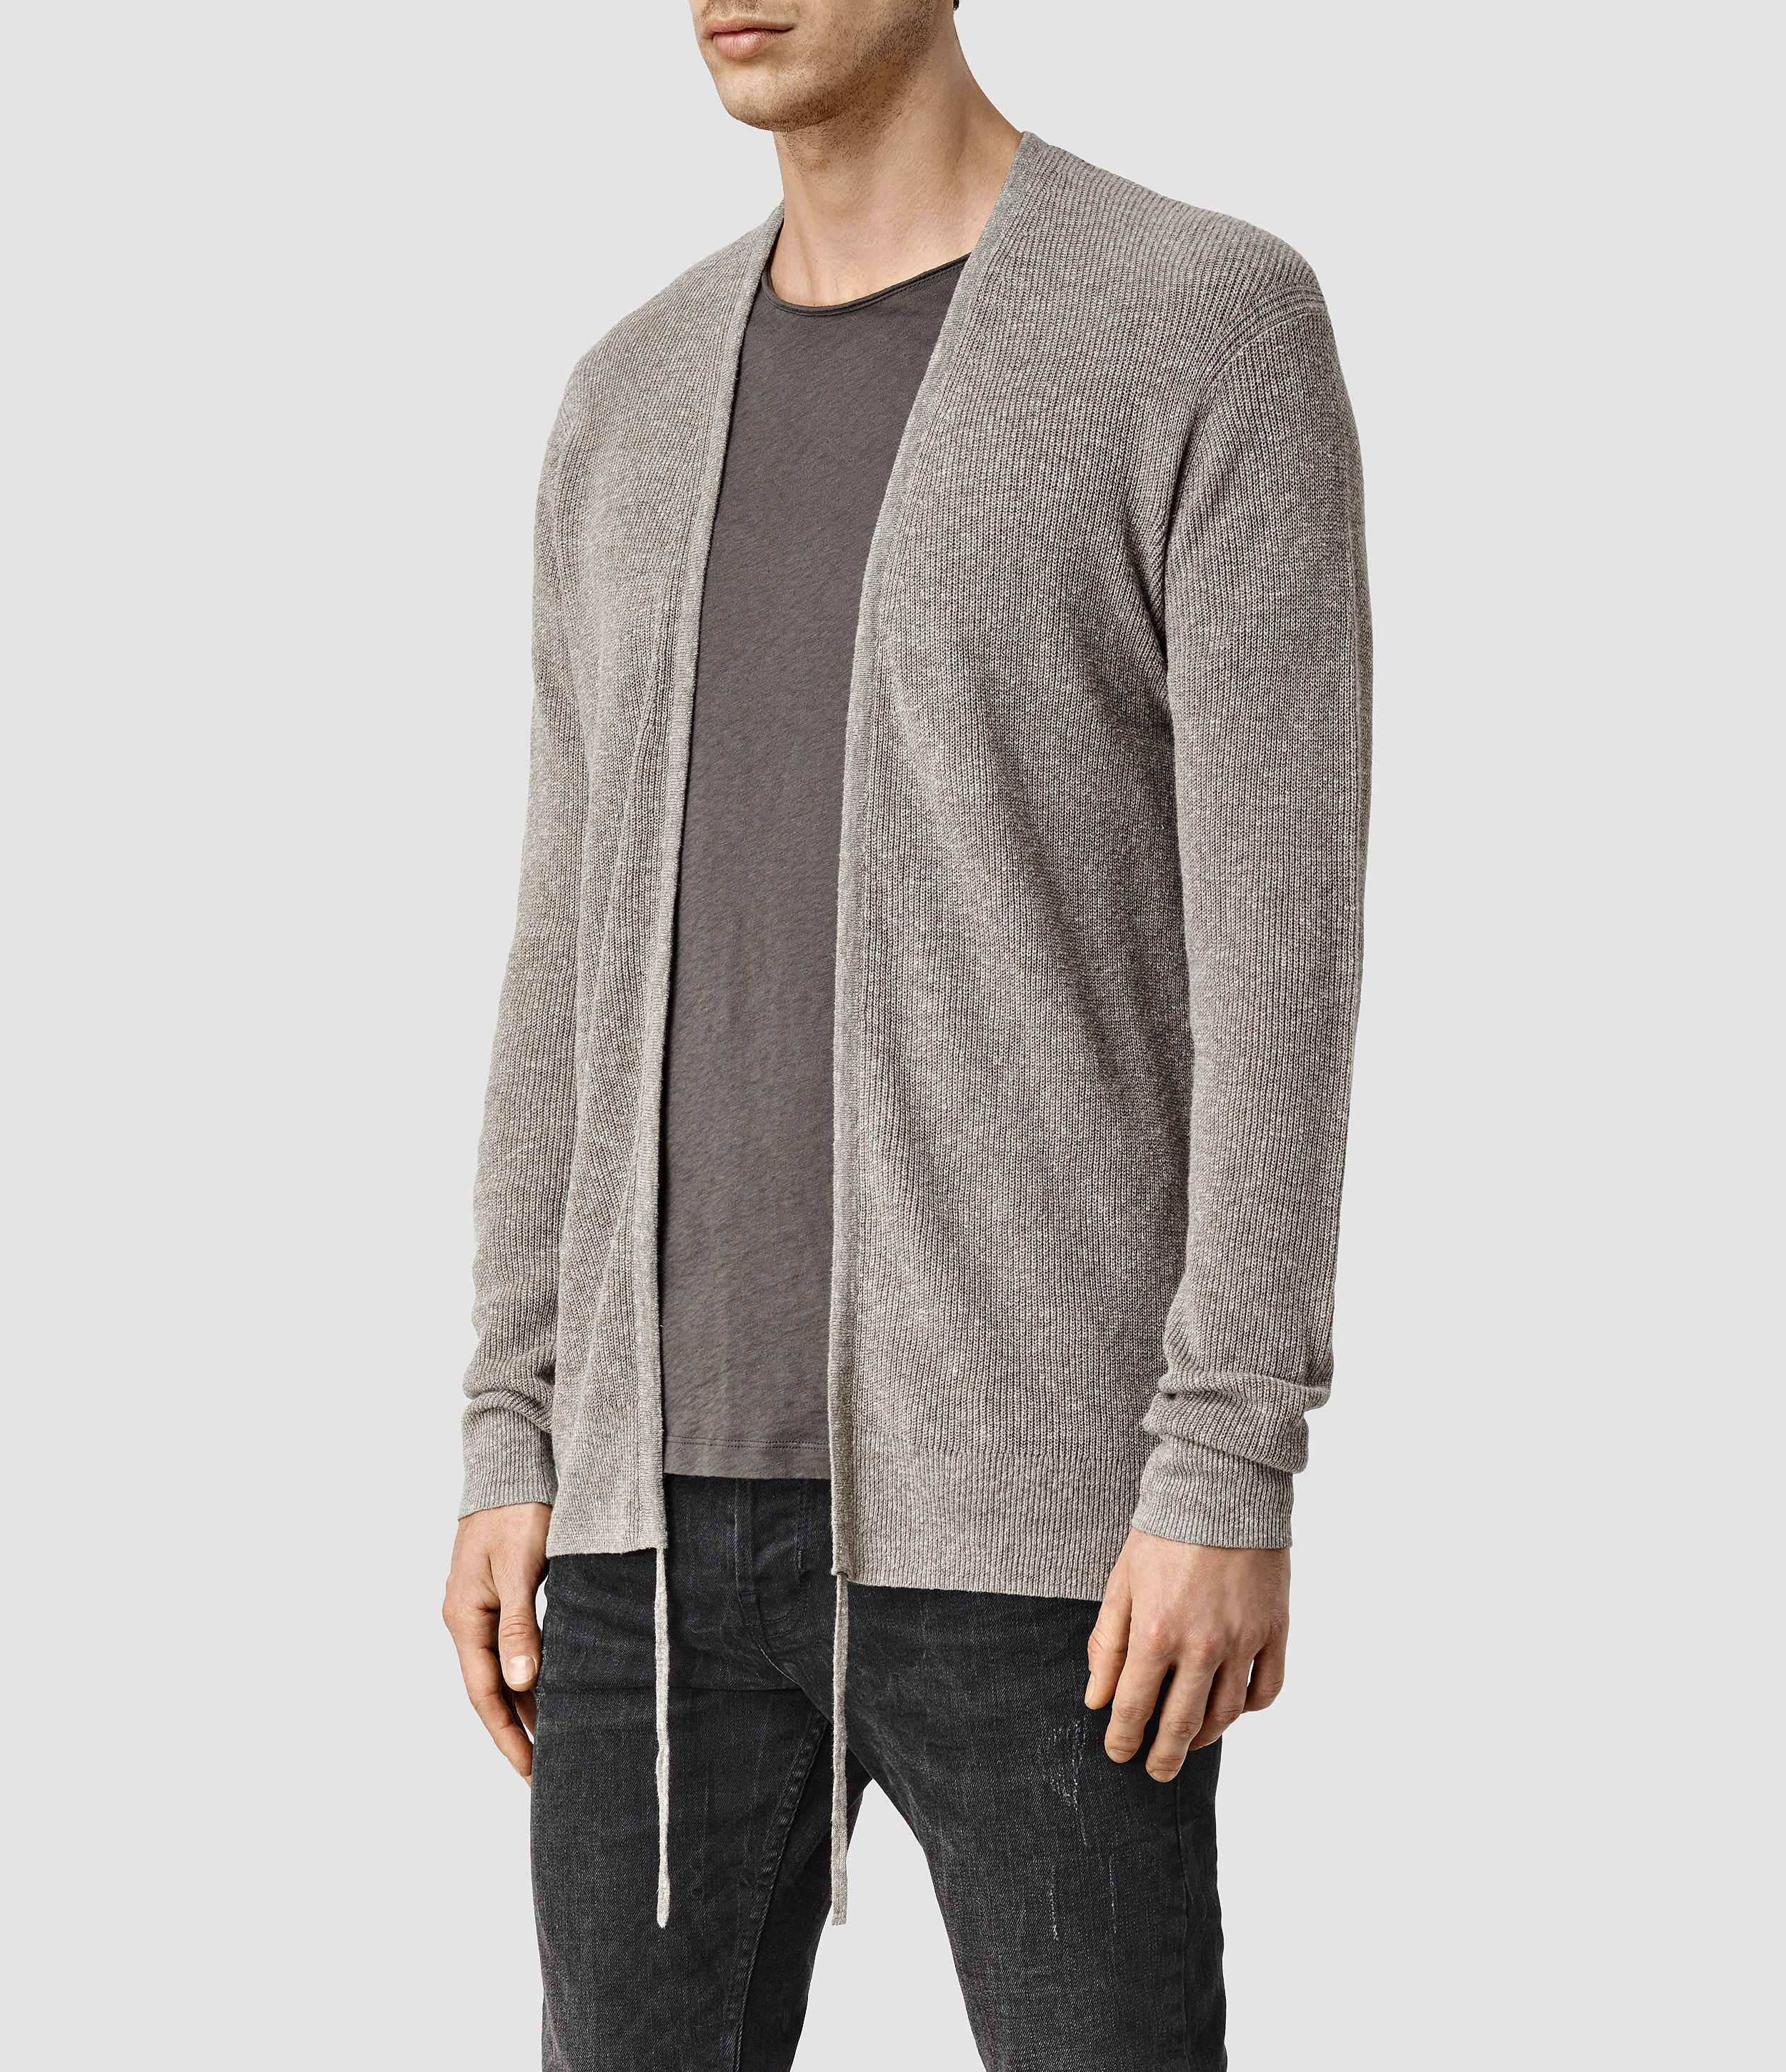 AllSaints Linen Tine Cardigan in Military Grey (Gray) for Men - Lyst